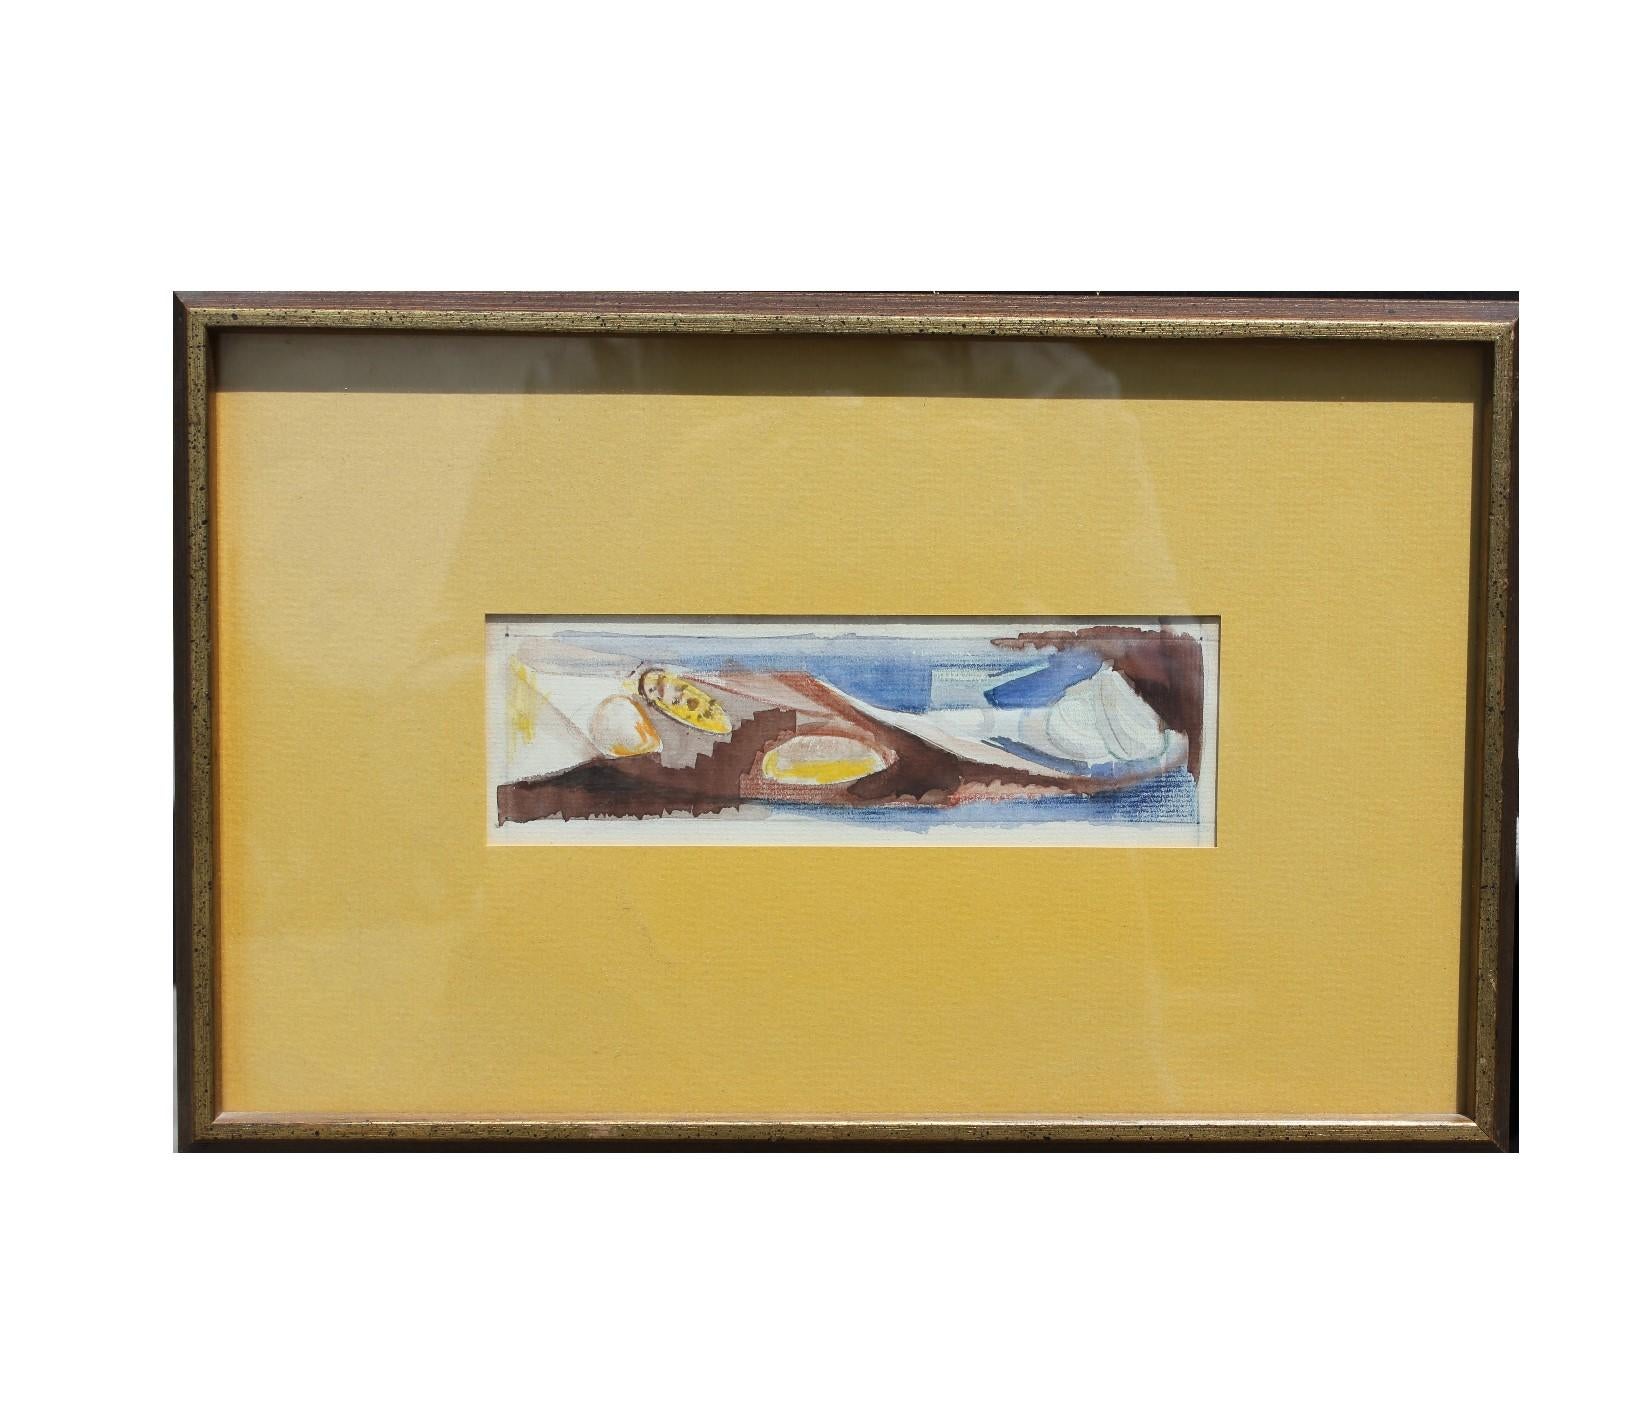 Small size watercolor image of shells. Painting is mainly blue, yellow and brown tones. Painting is framed in a painted wooden gold frame with a yellow matte.
Dimensions without Frame: H 3.5 in x W 8.5 in.
